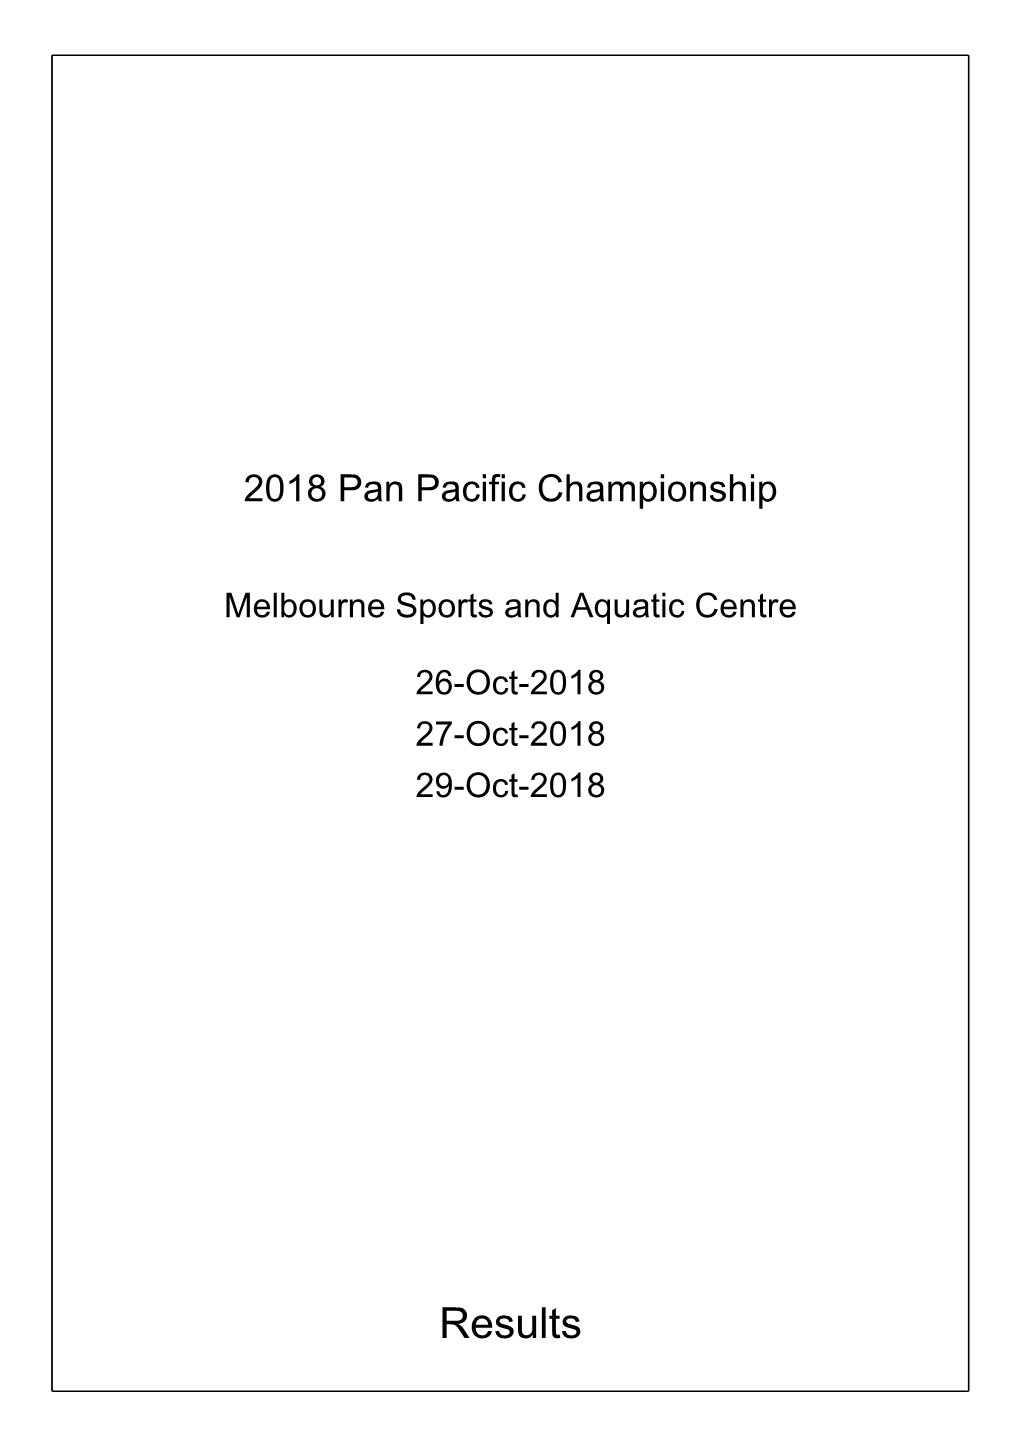 Results 2018 Pan Pacific Championship, 26-Oct-2018 - Results Generated: 05-May-2020 14:47:49